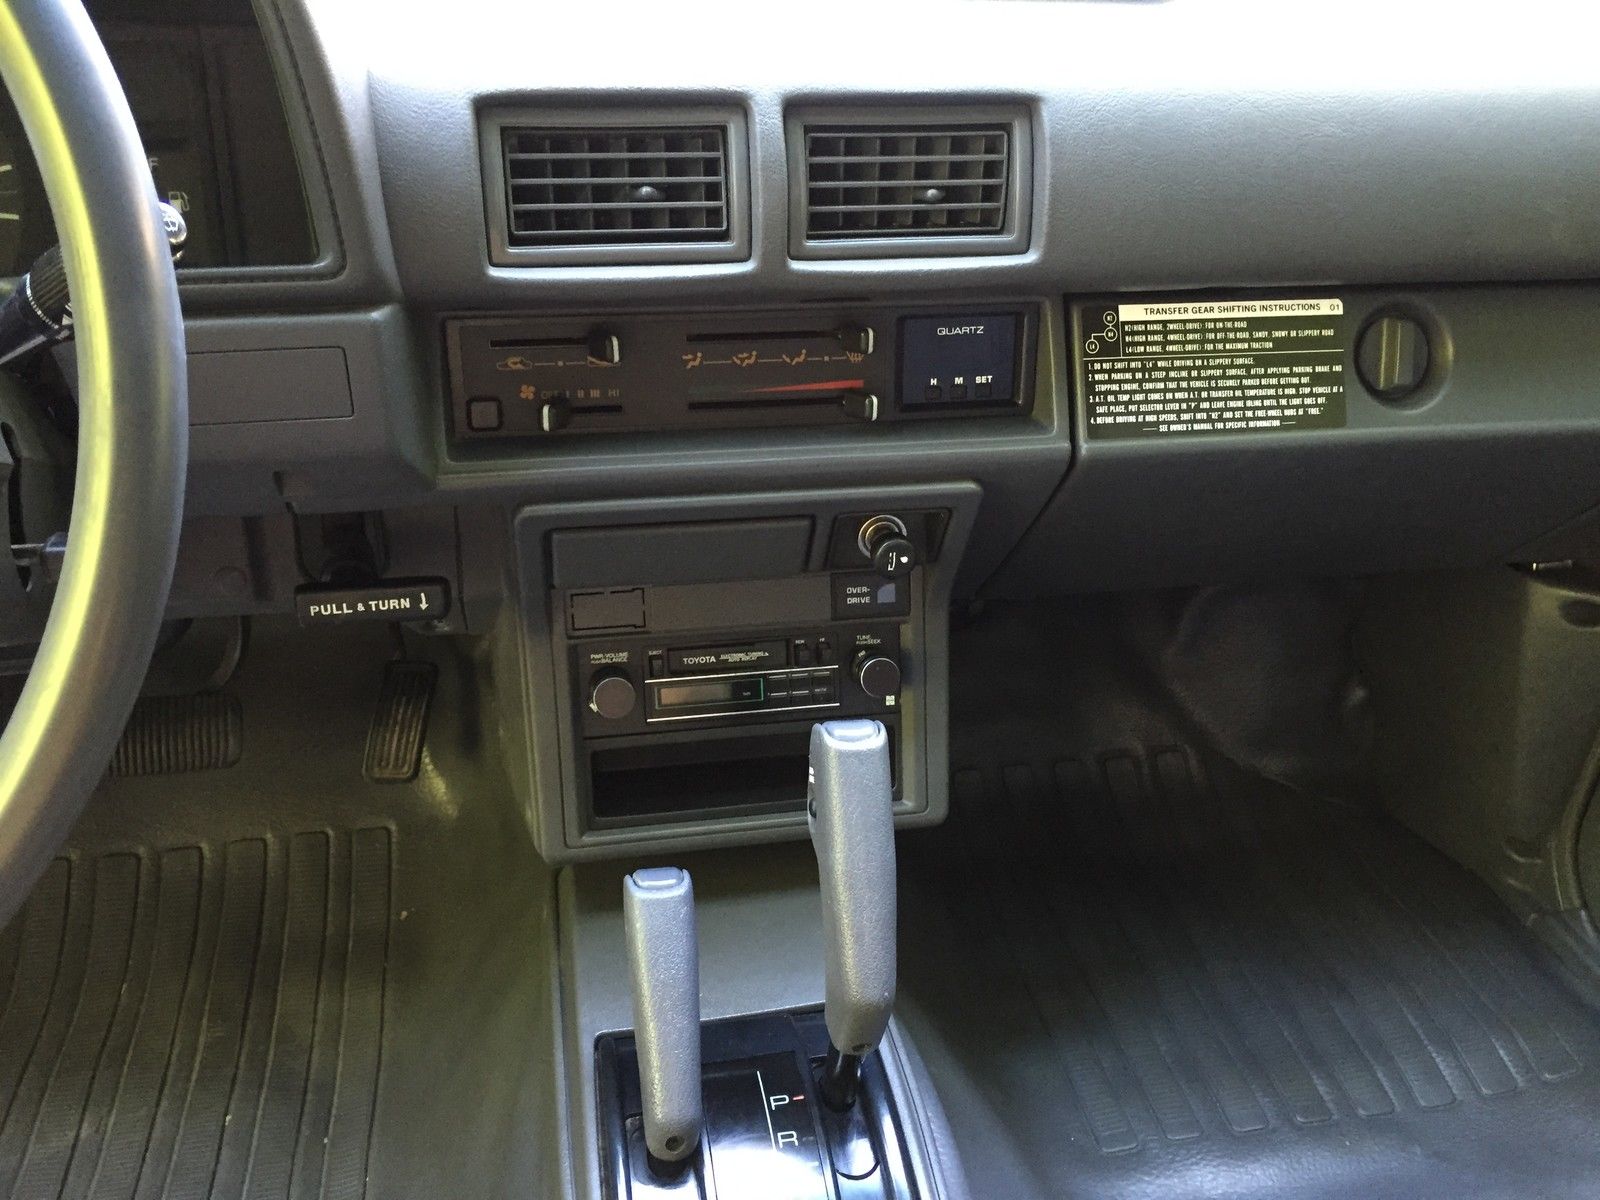 Rare 1987 Toyota Pickup 4x4 Xtra Cab Up for Sale on eBay ... 2010 camry hybrid fuse box location 